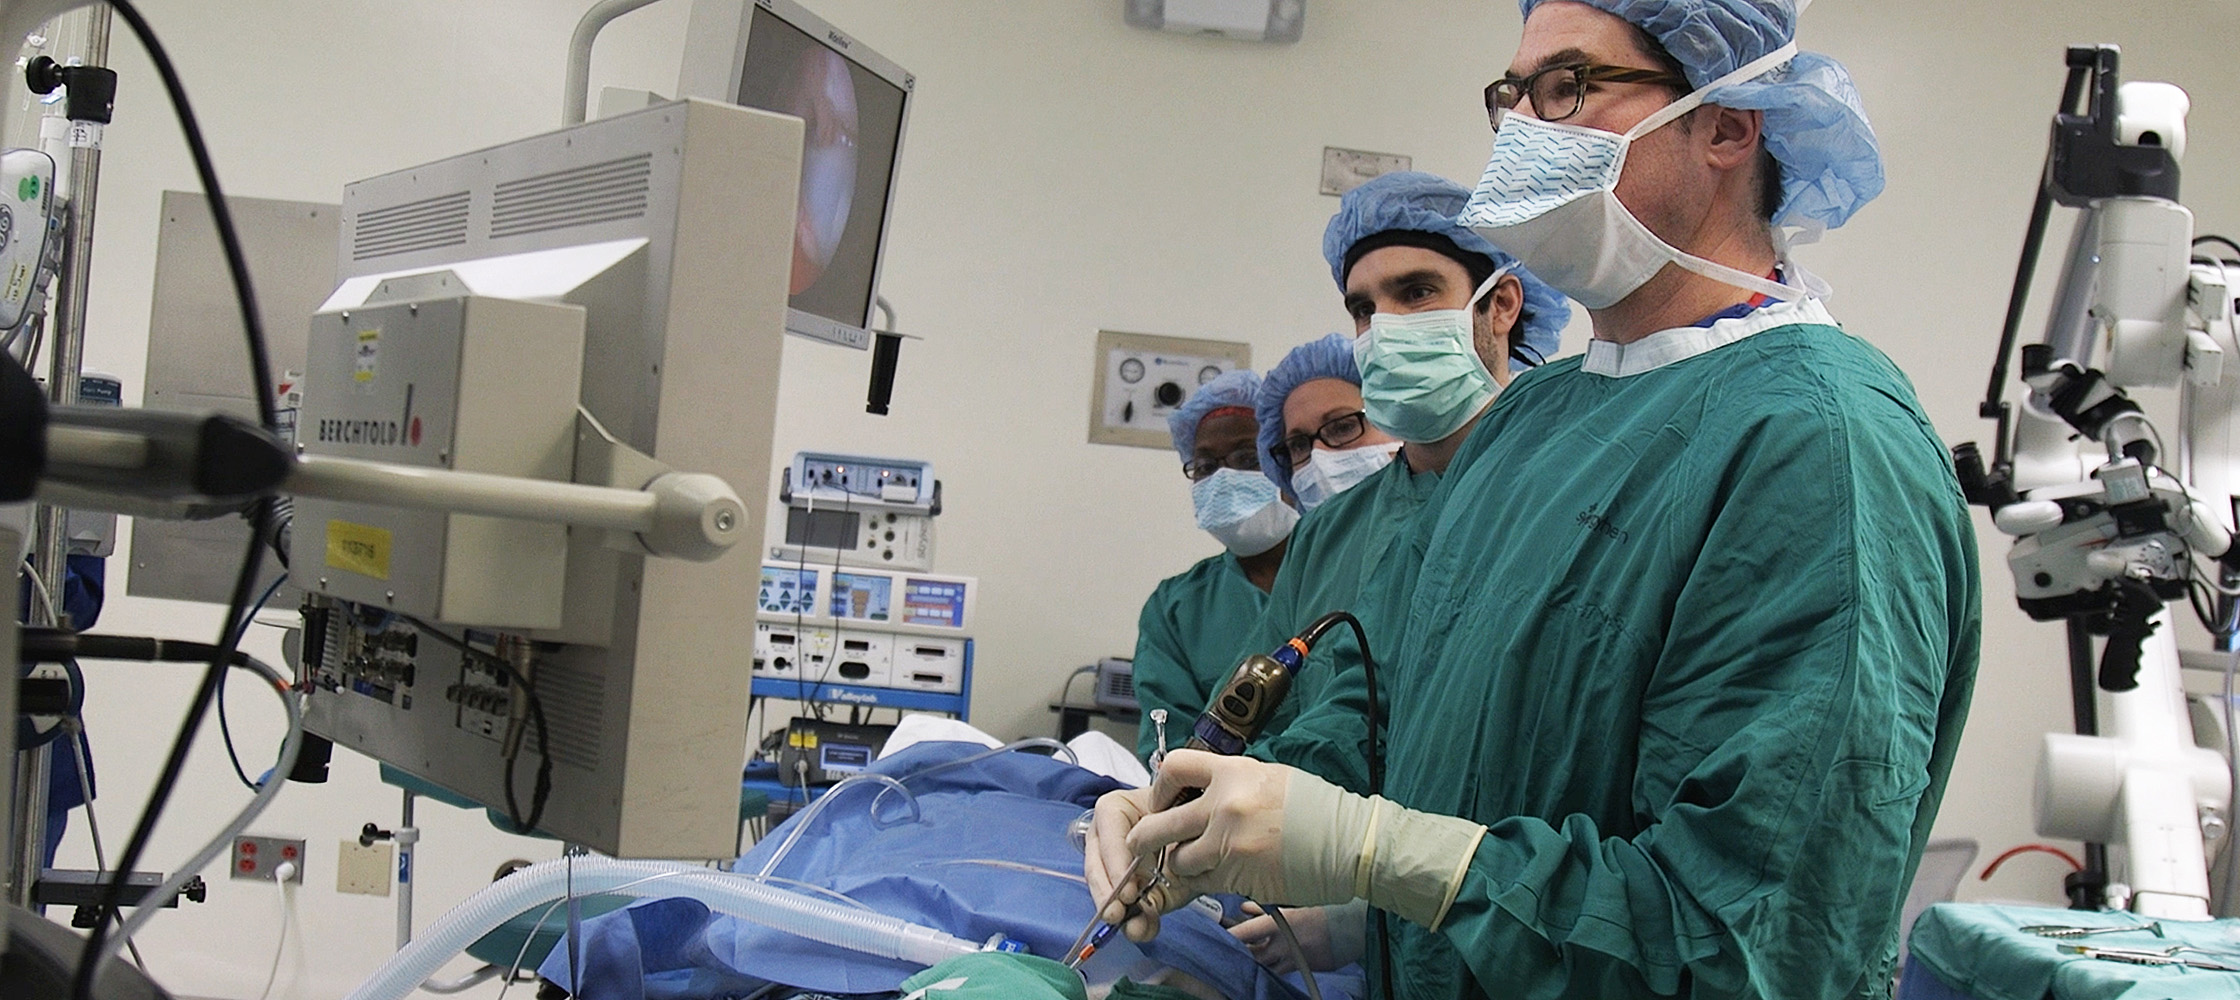 David Kaylie, MD, performs the minimally invasive procedure in the OR, but no overnight stay is required.